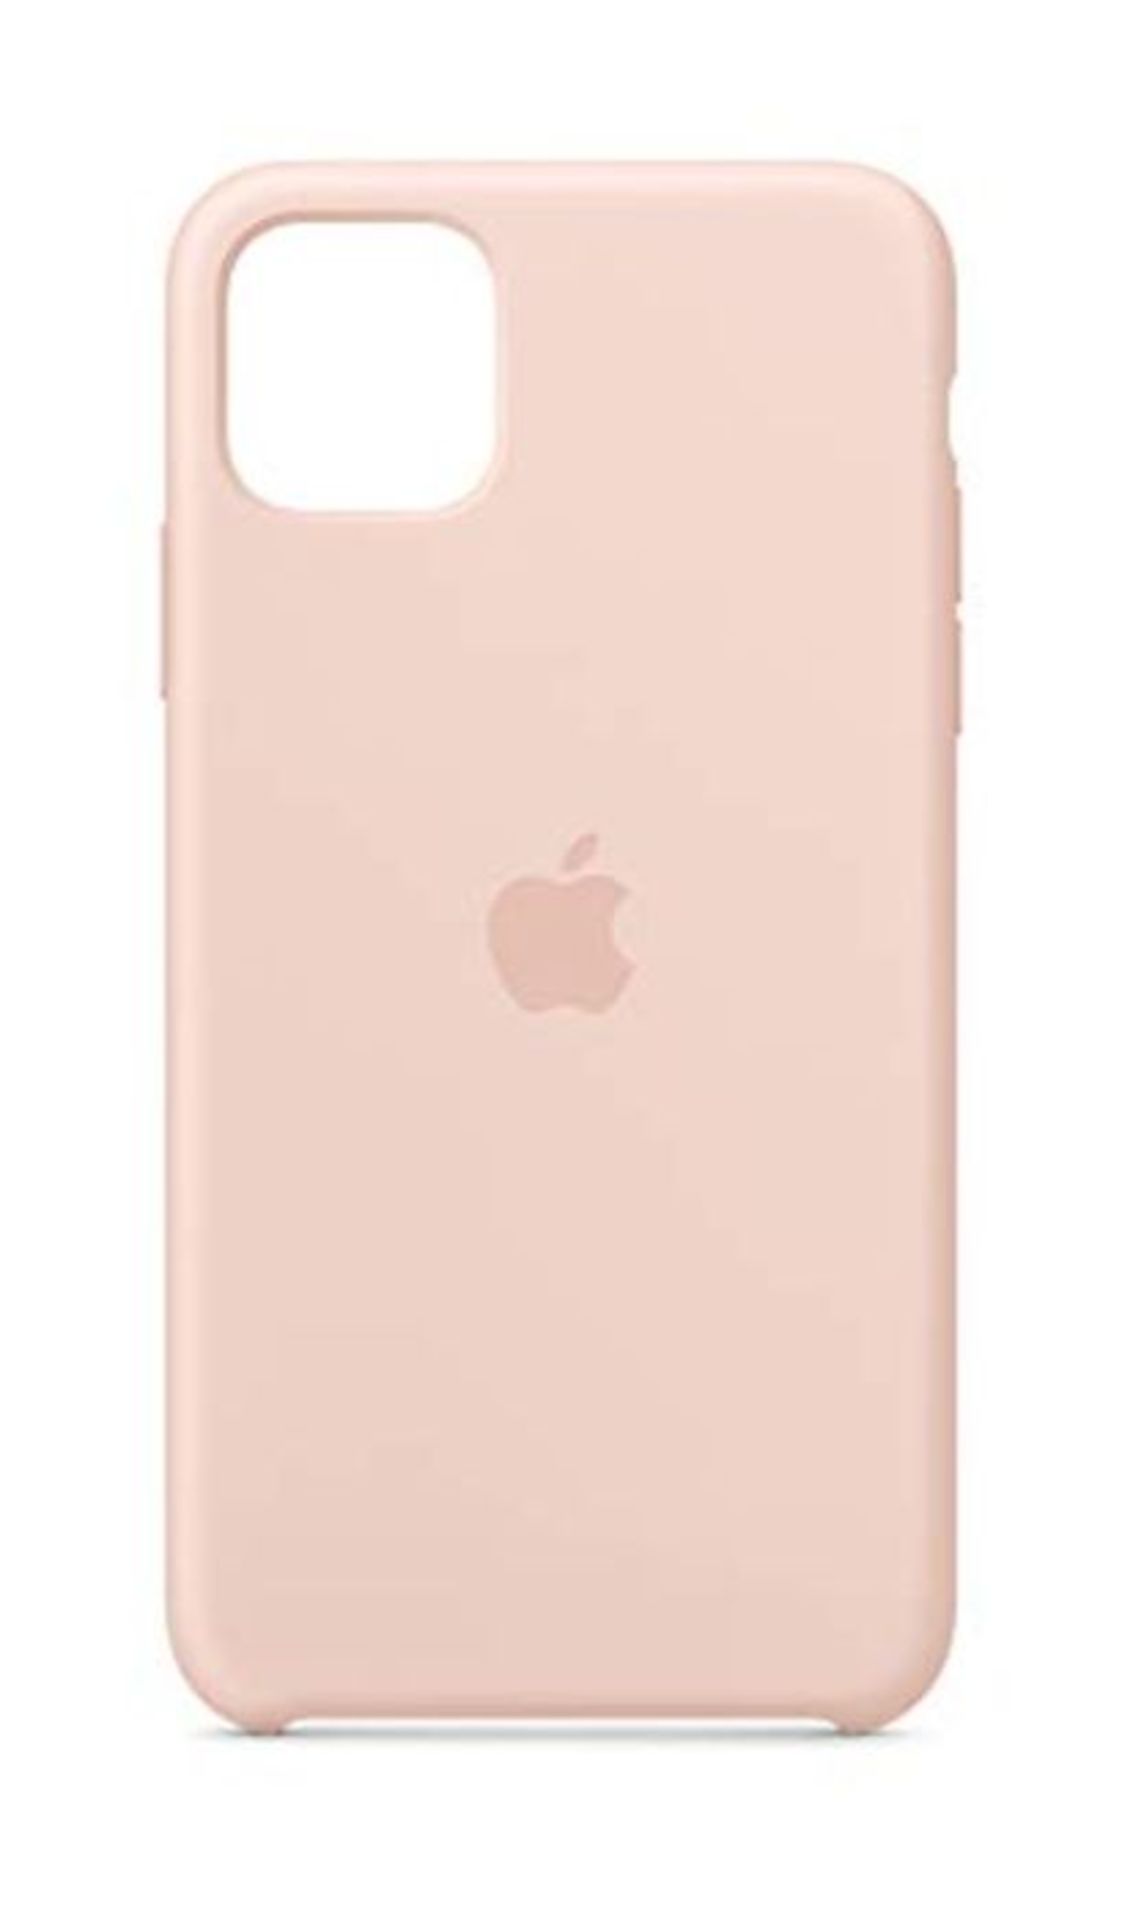 Apple Silicone Case (for iPhone 11 Pro Max) - Pink Sand